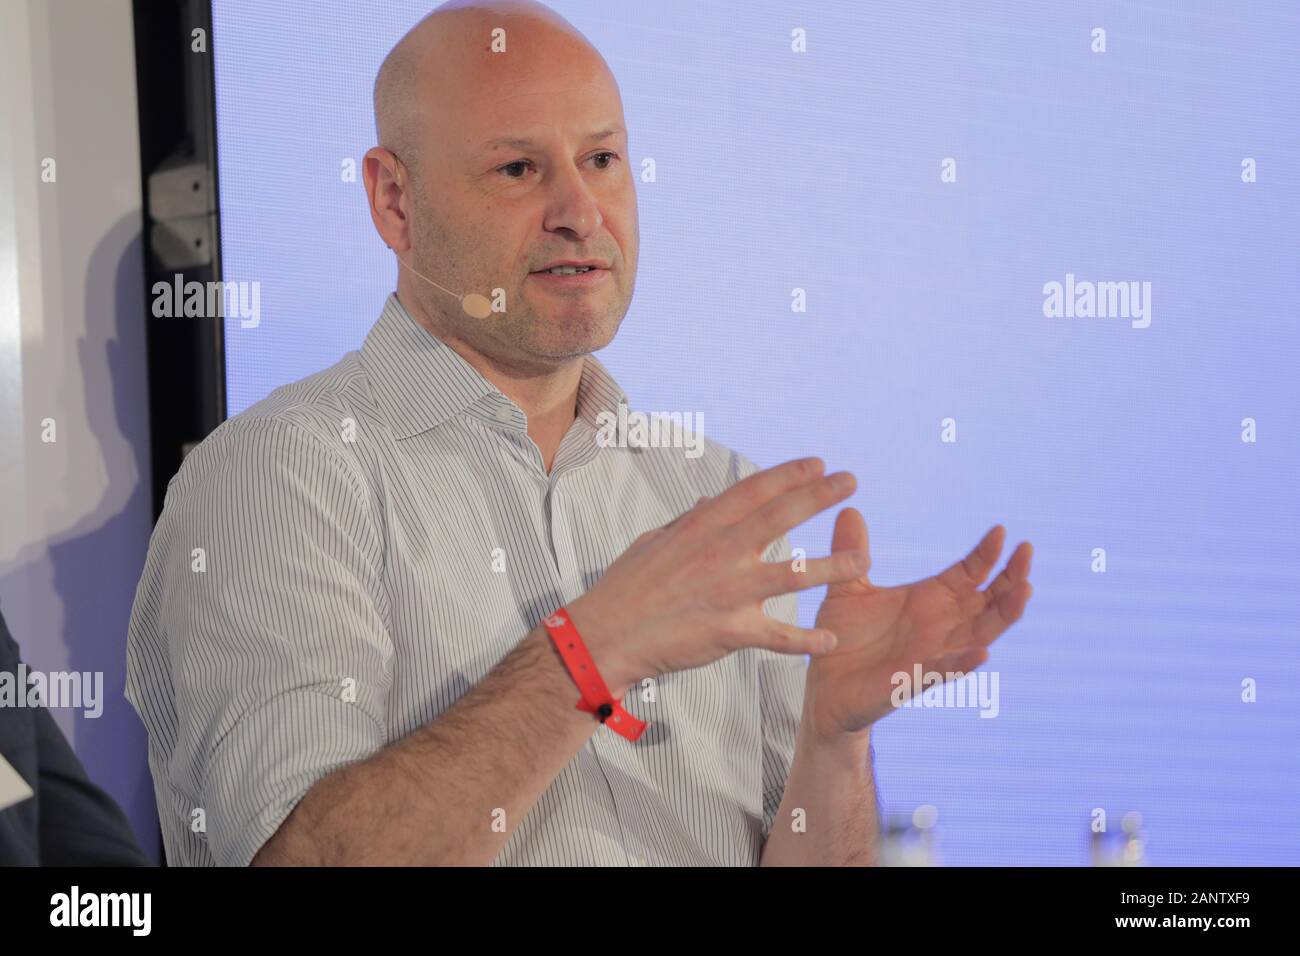 Munich, Germany. 19th Jan, 2020. Joe Lubin (Founder ConsenSys) speaks during a panel at DLD Munich Conference 2020, Europe's big innovation conference, Alte Kongresshalle, Munich, January 18-20, 2020 Picture Alliance for DLD/Hubert Burda Media | usage worldwide Credit: dpa/Alamy Live News Stock Photo